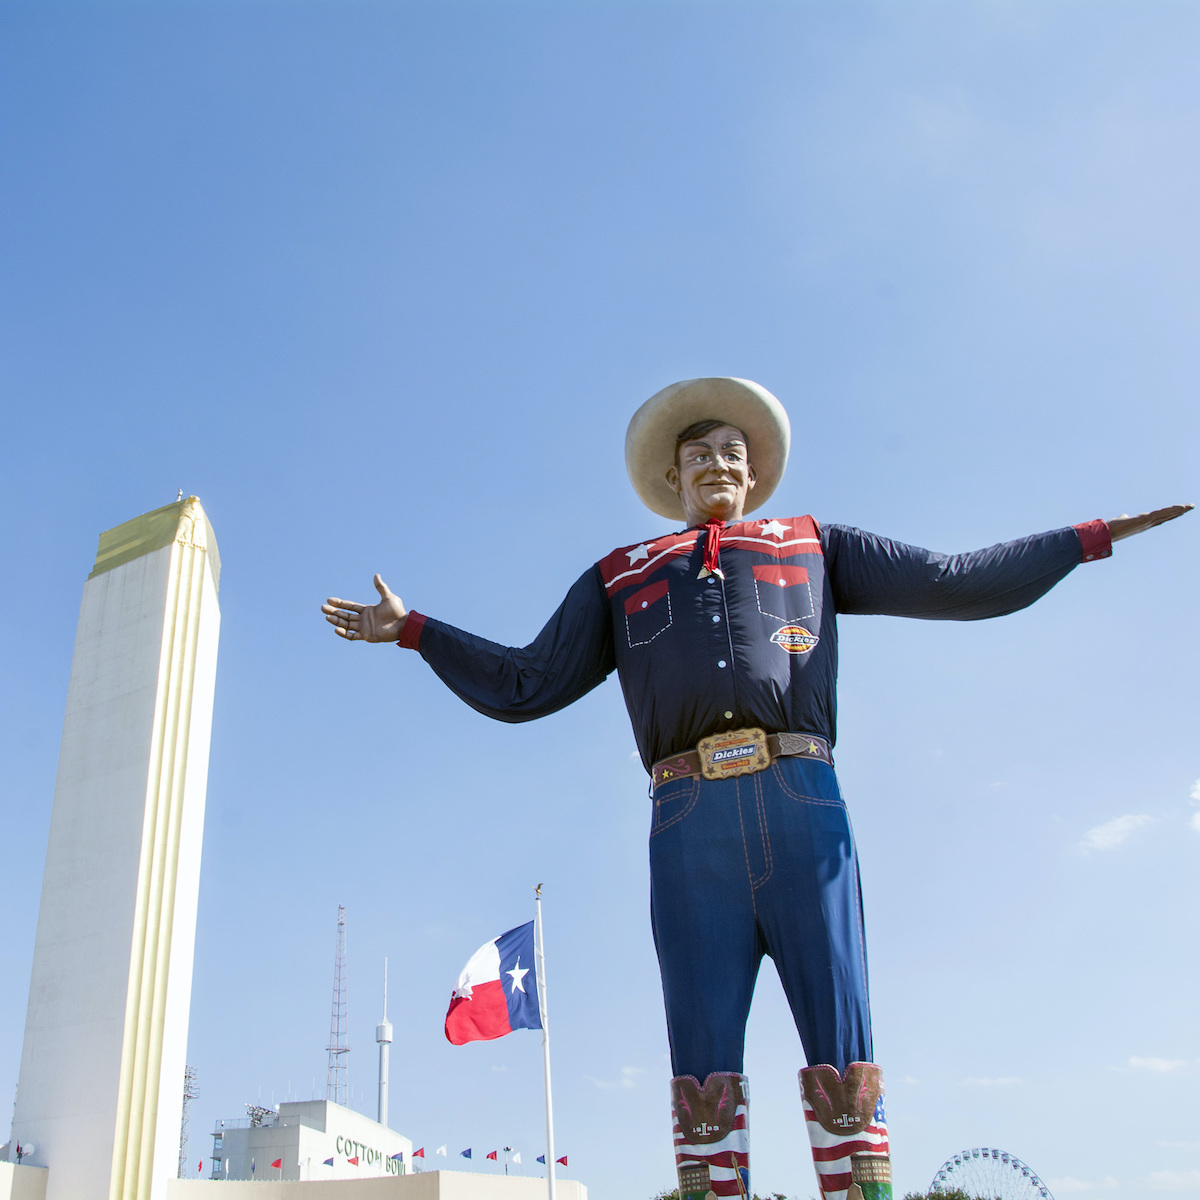 Big Tex in front of the Tower Building at the Texas State Fair